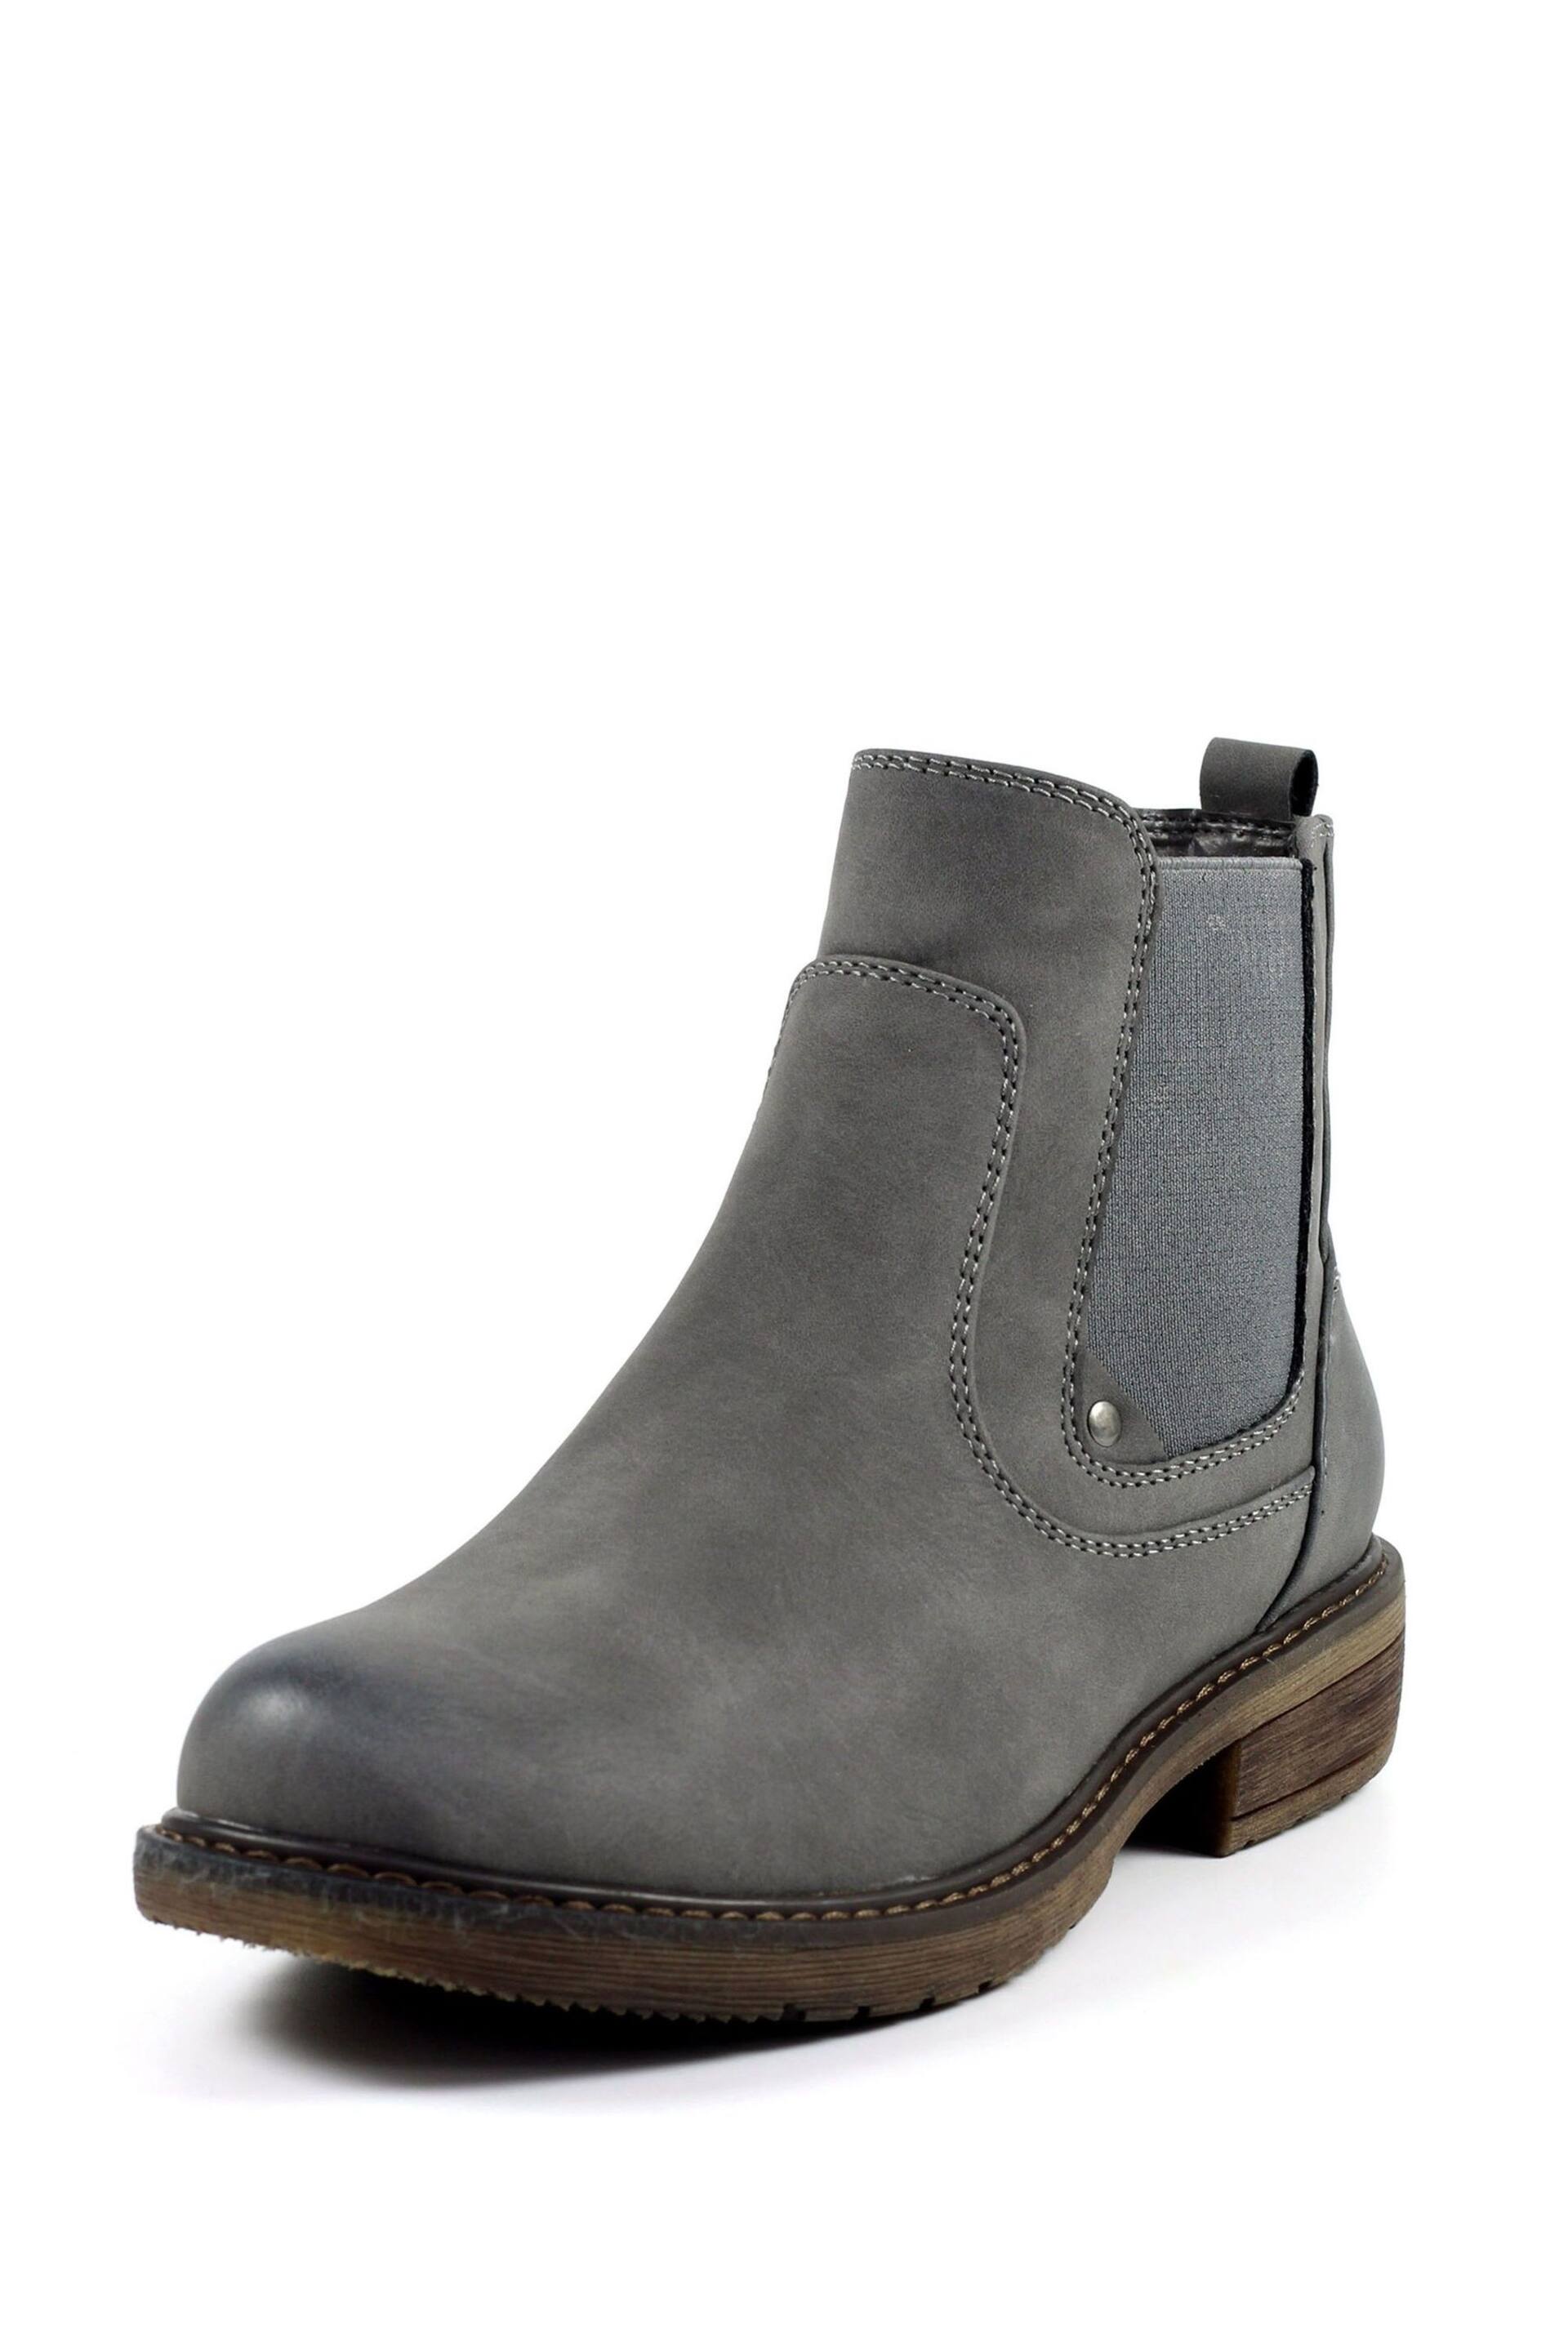 Lunar Roxie II Ankle Boots - Image 3 of 8